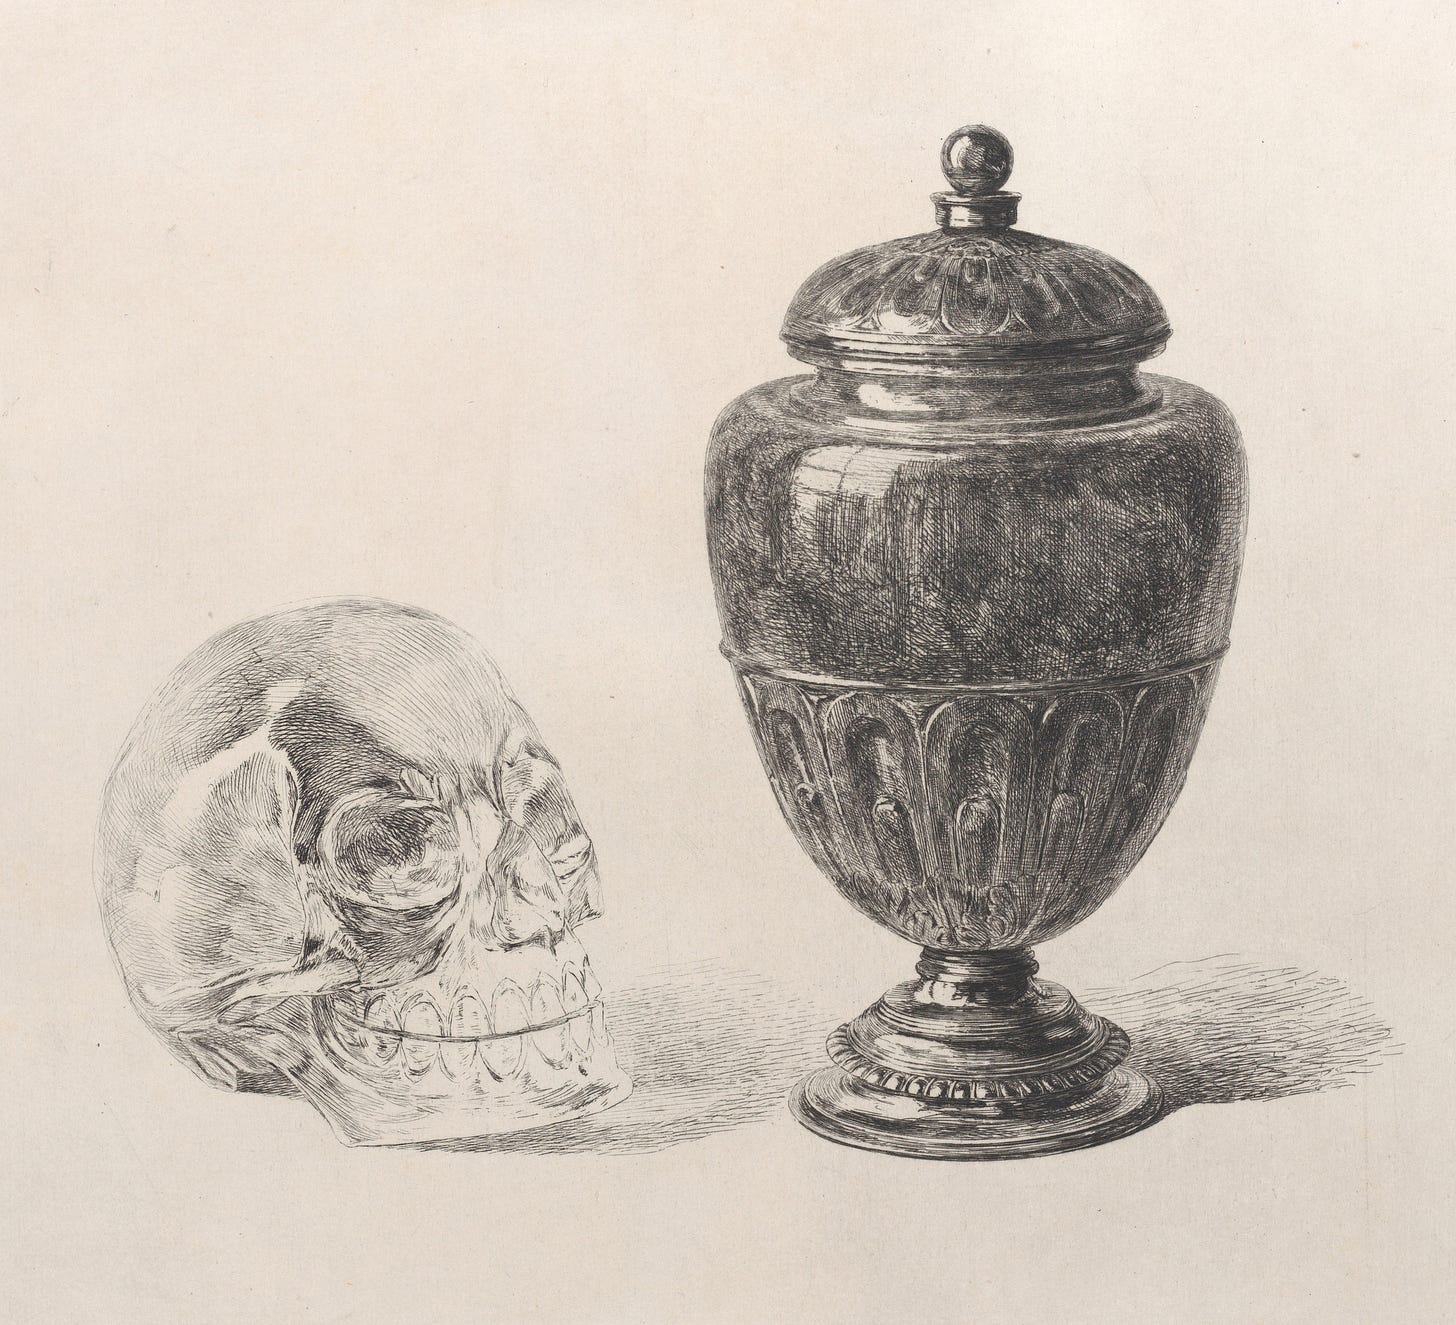 Black and white illustration of a jade vase and a crystal skull